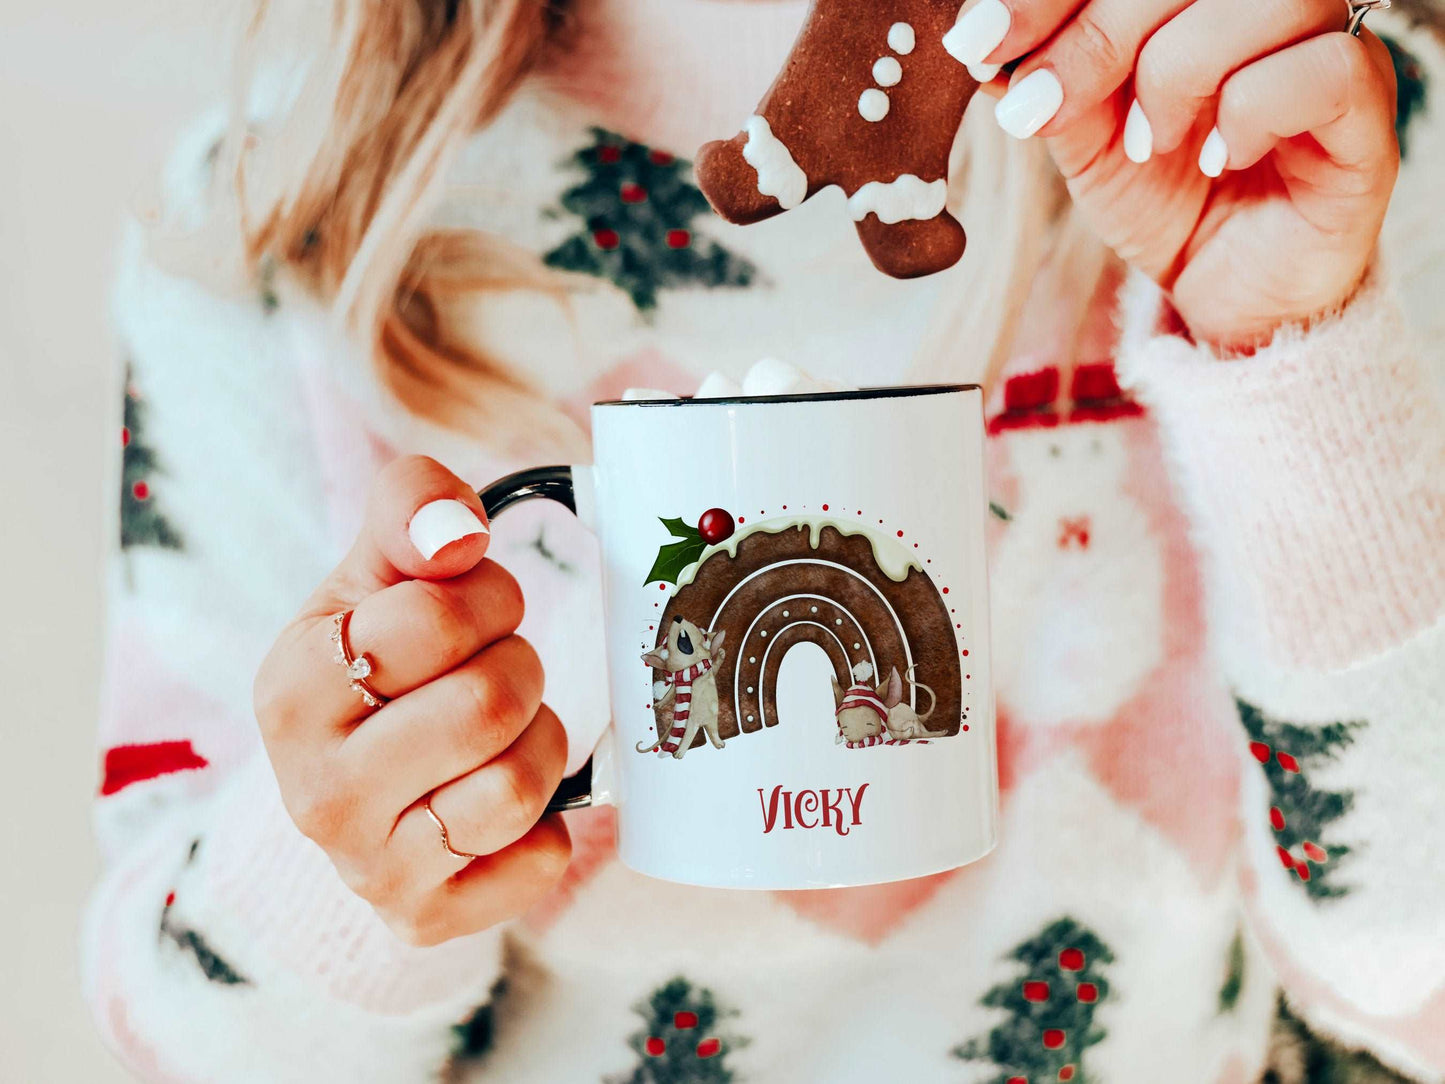 woman holding a white mug with a black handle. The mug has a cute christmas pudding and mouse design printed on it with a name below